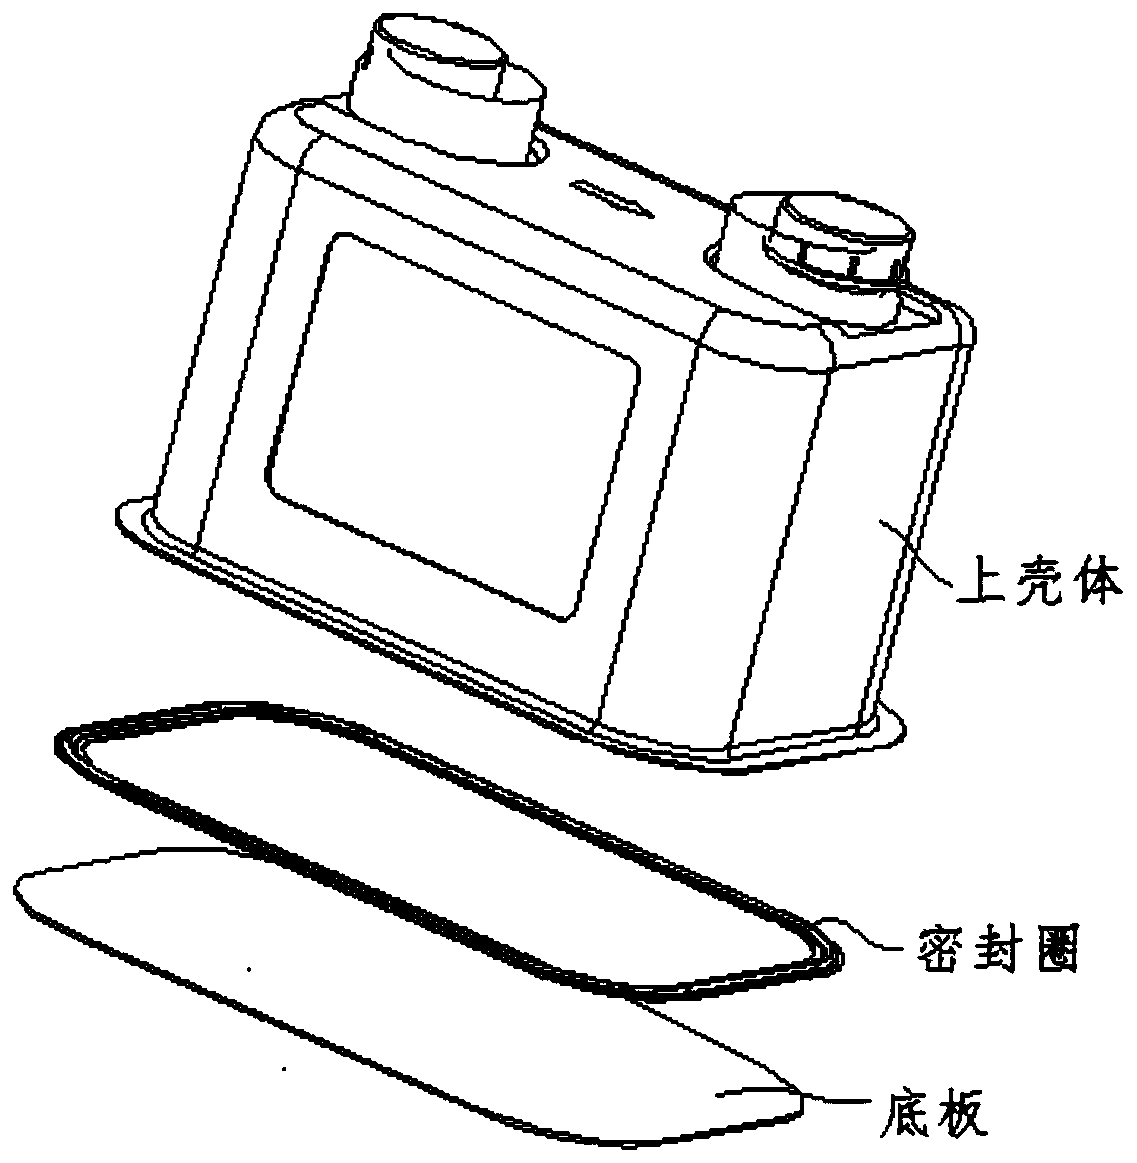 Reliably-sealed metering instrument shell